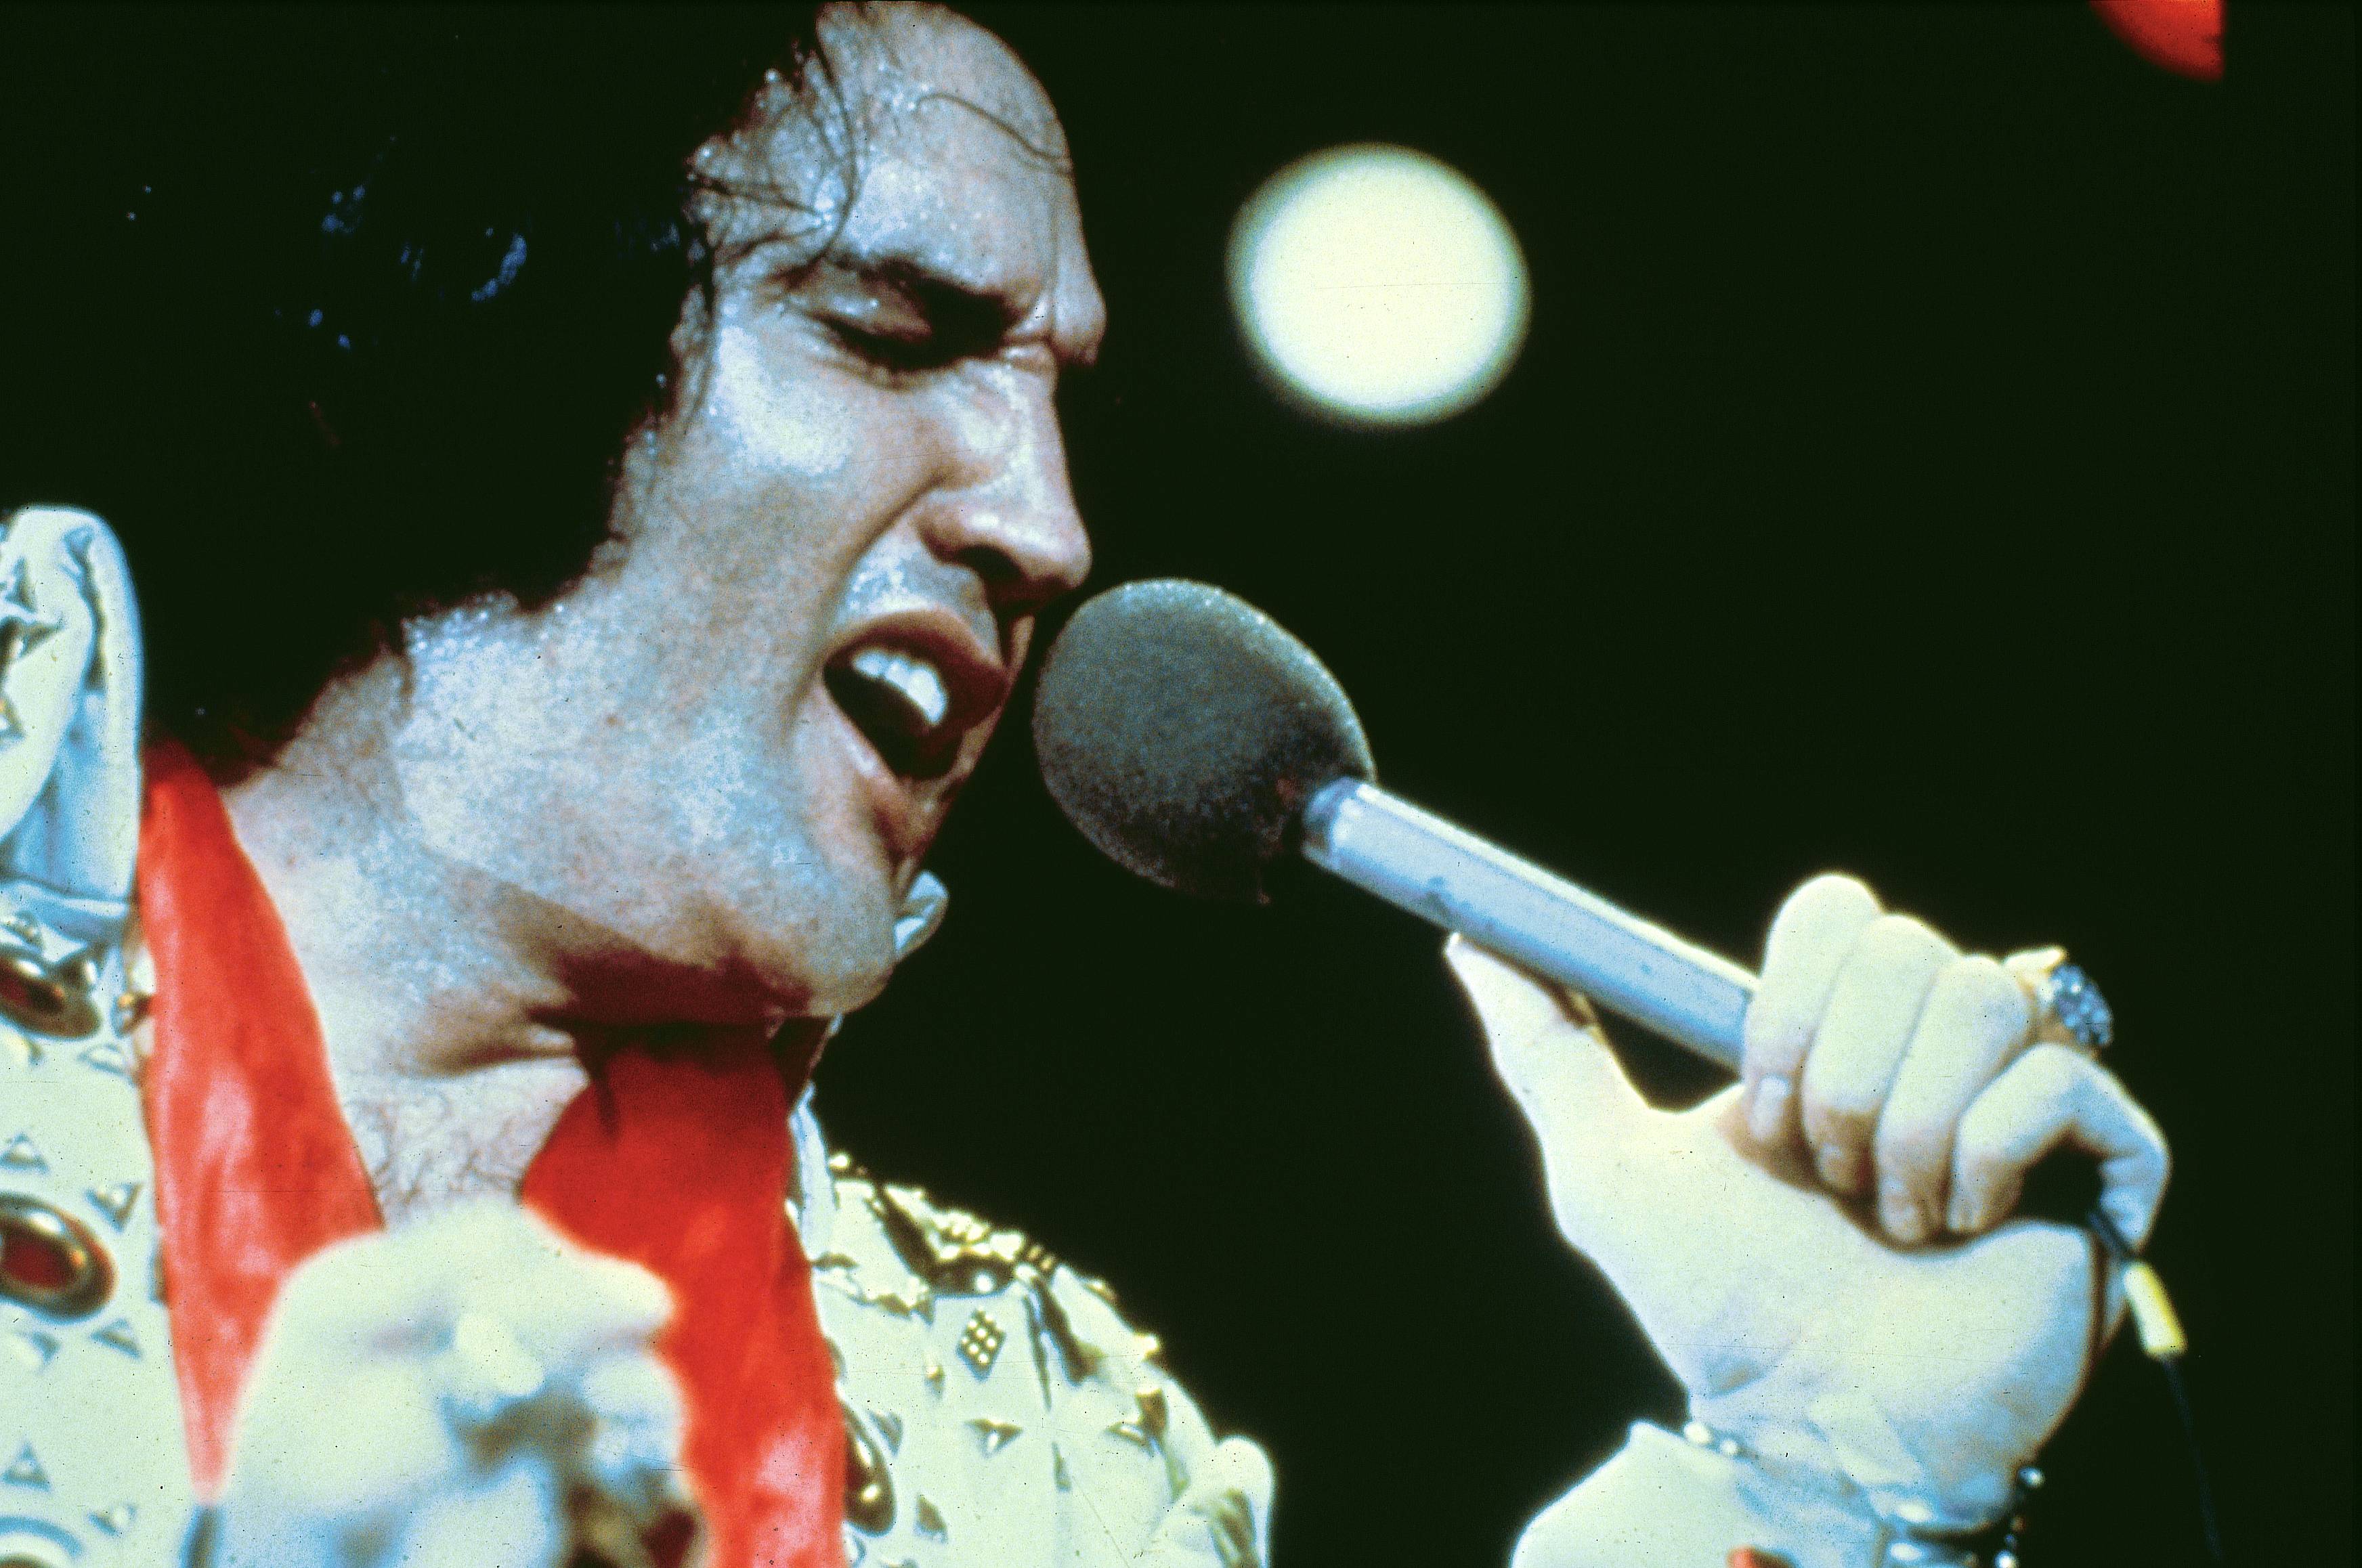 Elvis Presley singing a song into a microphone